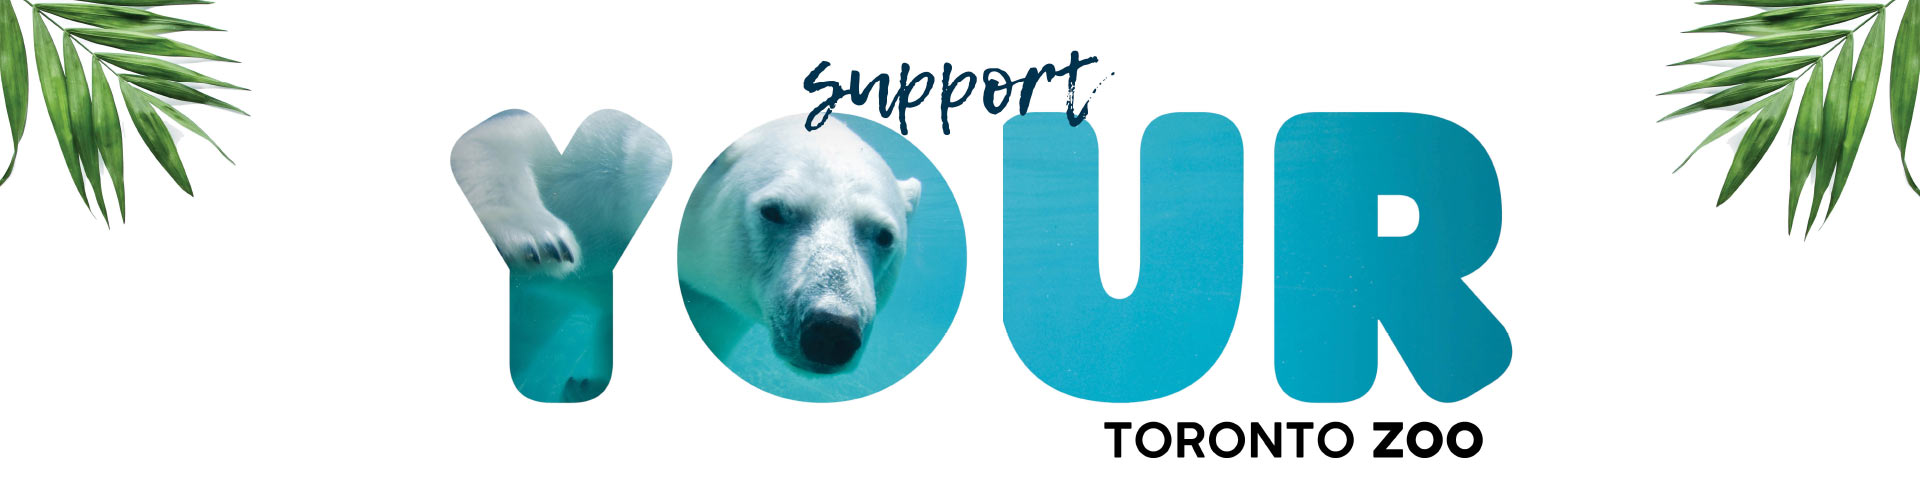 Support Your Zoo